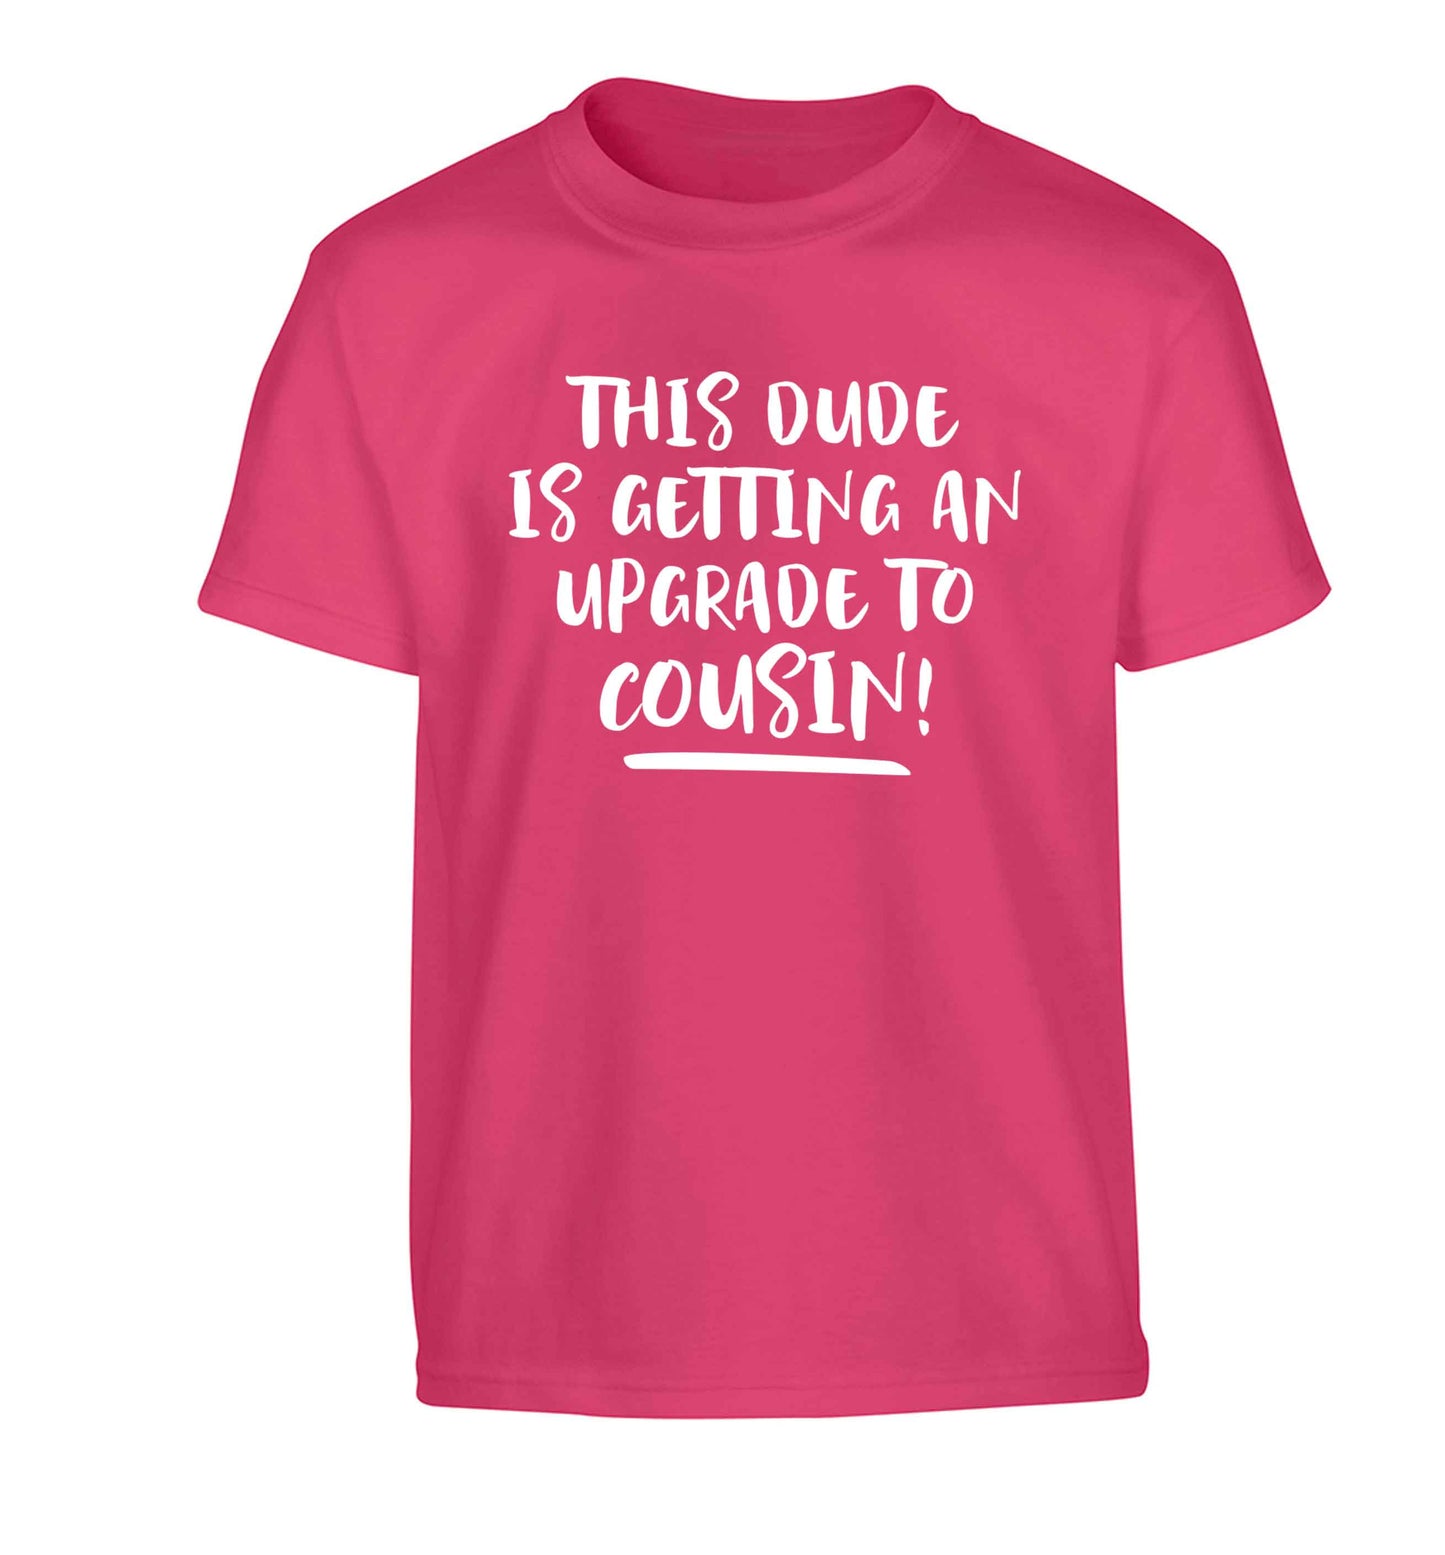 This dude is getting an upgrade to cousin! Children's pink Tshirt 12-13 Years